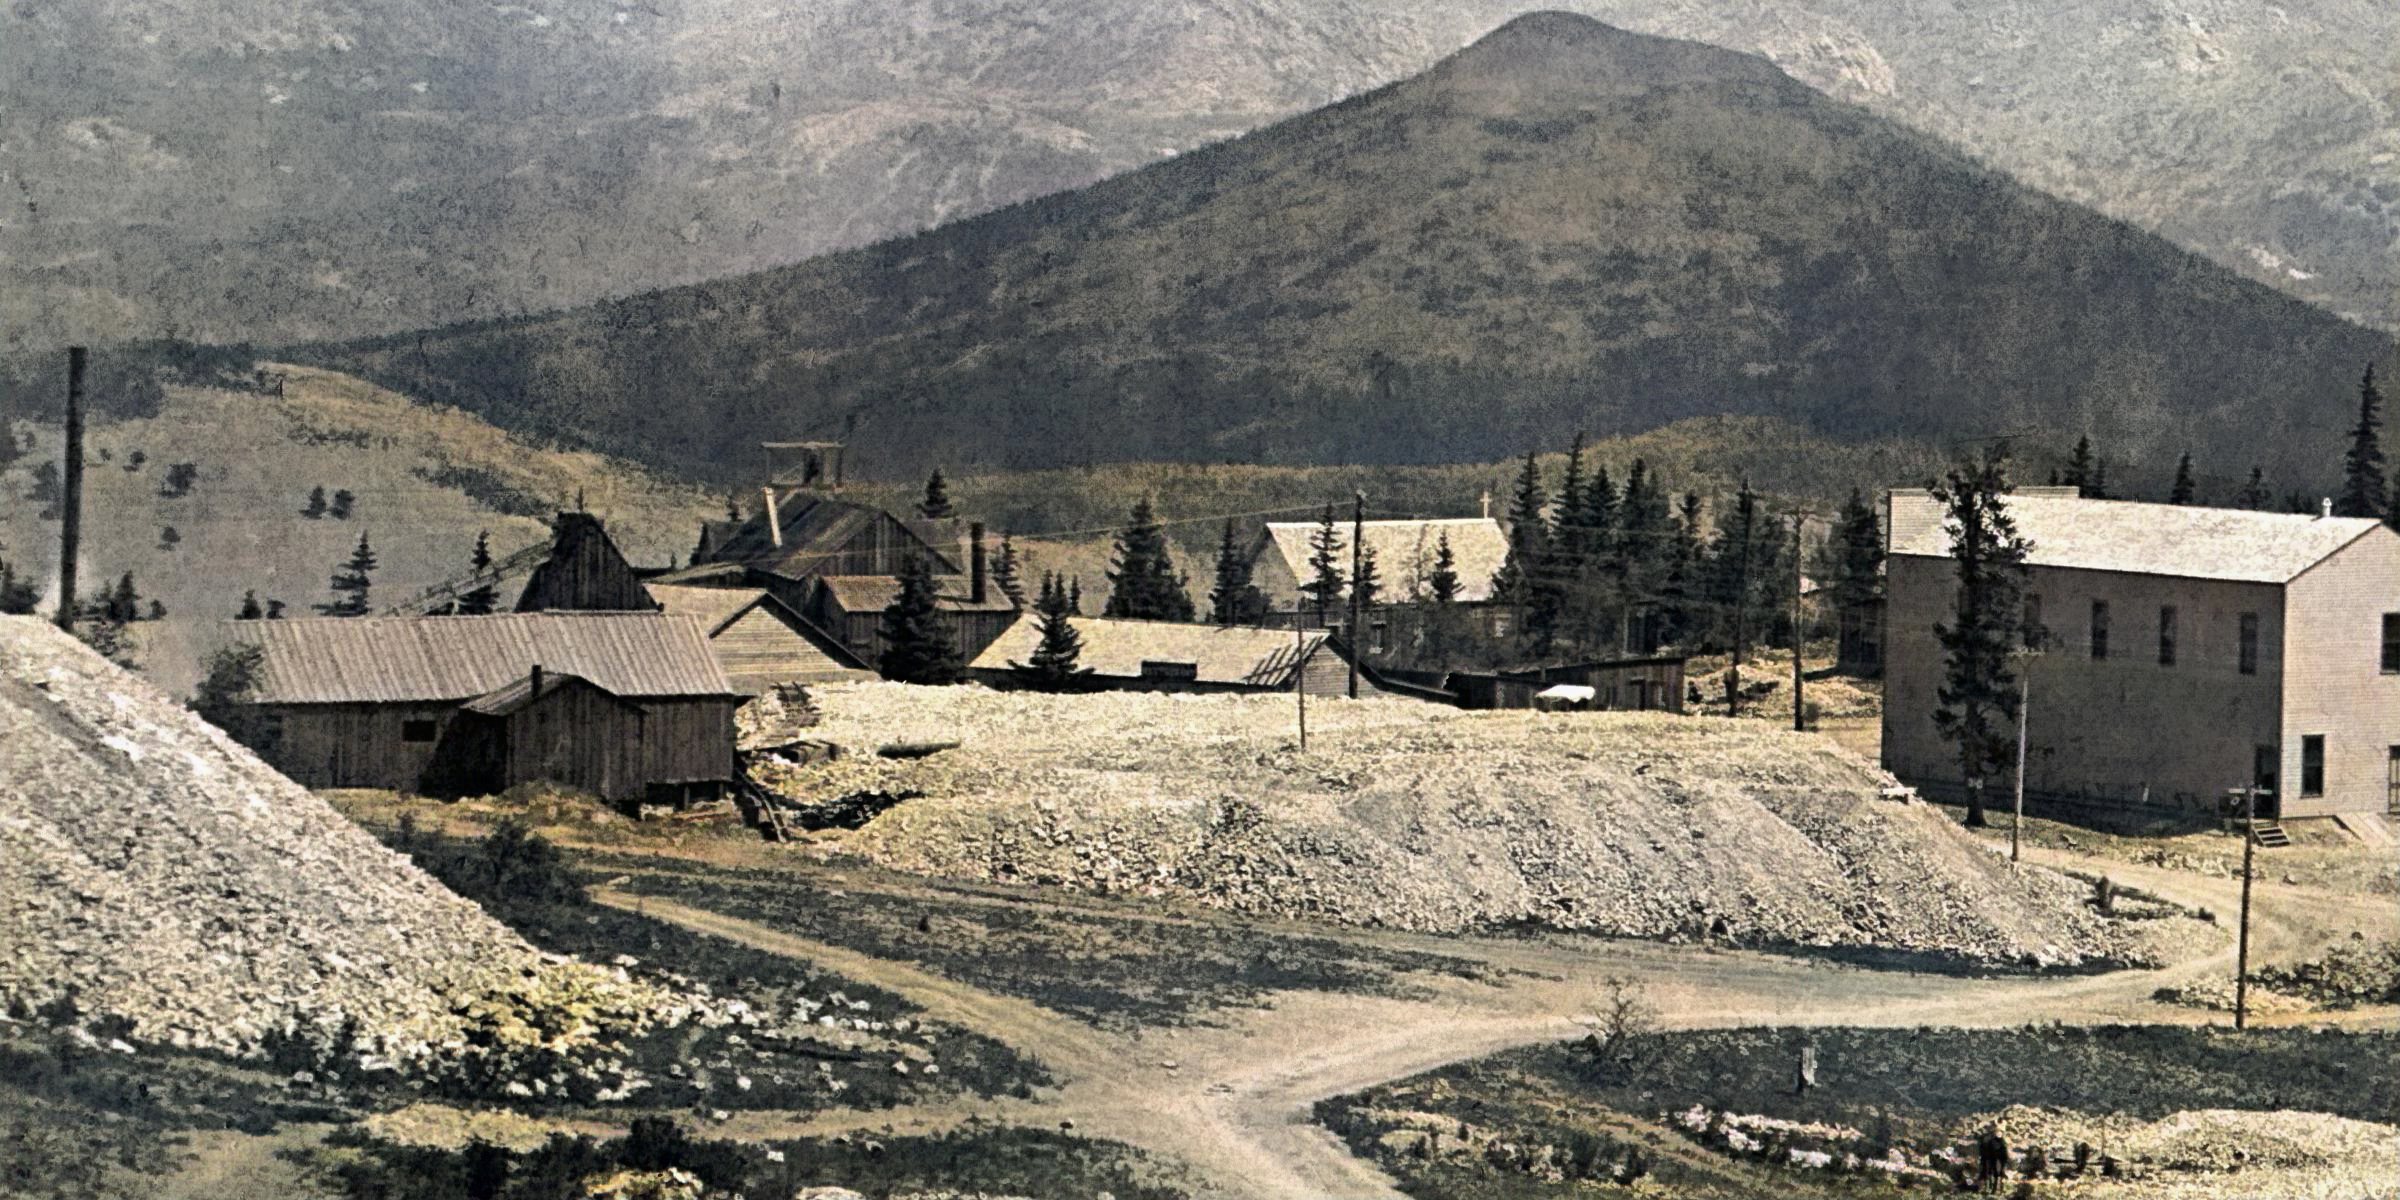    * Old Pharmacist Mine is seen at far left with a triangular peaked Cupola and a longish narrow structure as a Shaft House, said to be an Incline type of shaft. Quite an extensive dump spread out east of the structure. The Shed poking out towards the photographer is per Sanborn Fire Insurance map of 1900 (Sheet 14, Victor set) for the Blacksmith. The dump in foreground obscuring the west end of the shaft house is part of the Zenobia dump.
   * Beyond the Pharmacist, into the image just at right, is the Burns Mine with part of a head frame poking up from the roof. What is in the image is not fully fitting the 1900 Sanborn map, but that mine was not included in the 1896 maps and the 1908 edition shows a different look altogether.
   * A rectangular shaped structure and marked with a cross is seen further right, a church in Altman, also seen on the 1908 Sanborn map, marked as R.C. Church, not used by then.
   * The structure that was later to hold the Geo. McMillan Grocery Shop marked out in other photo's with an extension not seen in this photo is located at southwest end of the main-street of Altman, or far-right in this cropped view.
   I did procure the colored version of this image. Source was grey-toned, or in common speech black & white. Used an online service and tweaked and worked with image to get what looks best to my eyes for the moment.